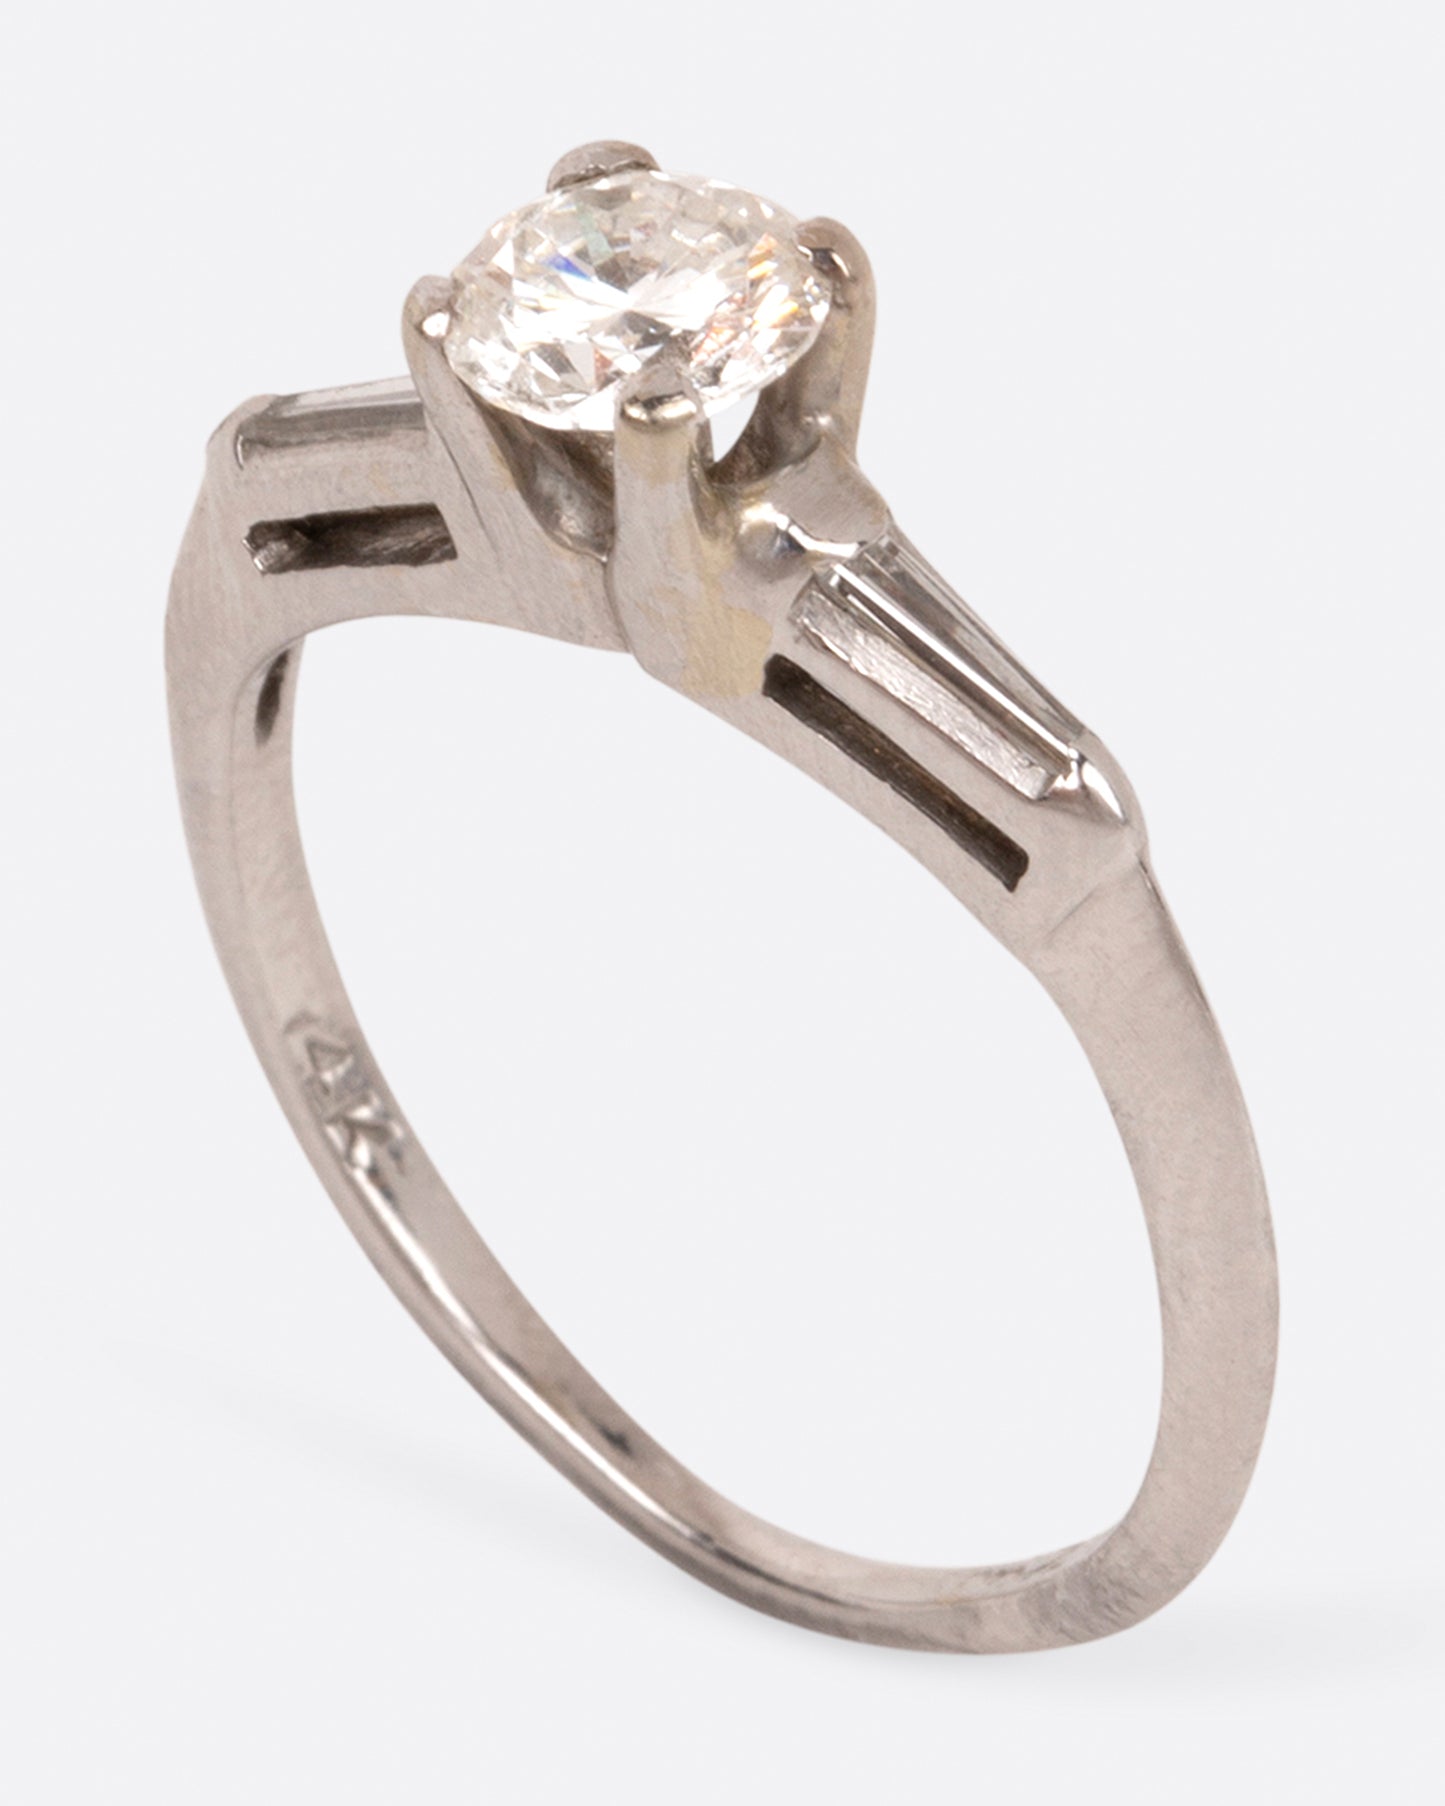 A white gold ring with a round prong-set diamond at the center and tapered baguette diamonds on either side, shown standing.